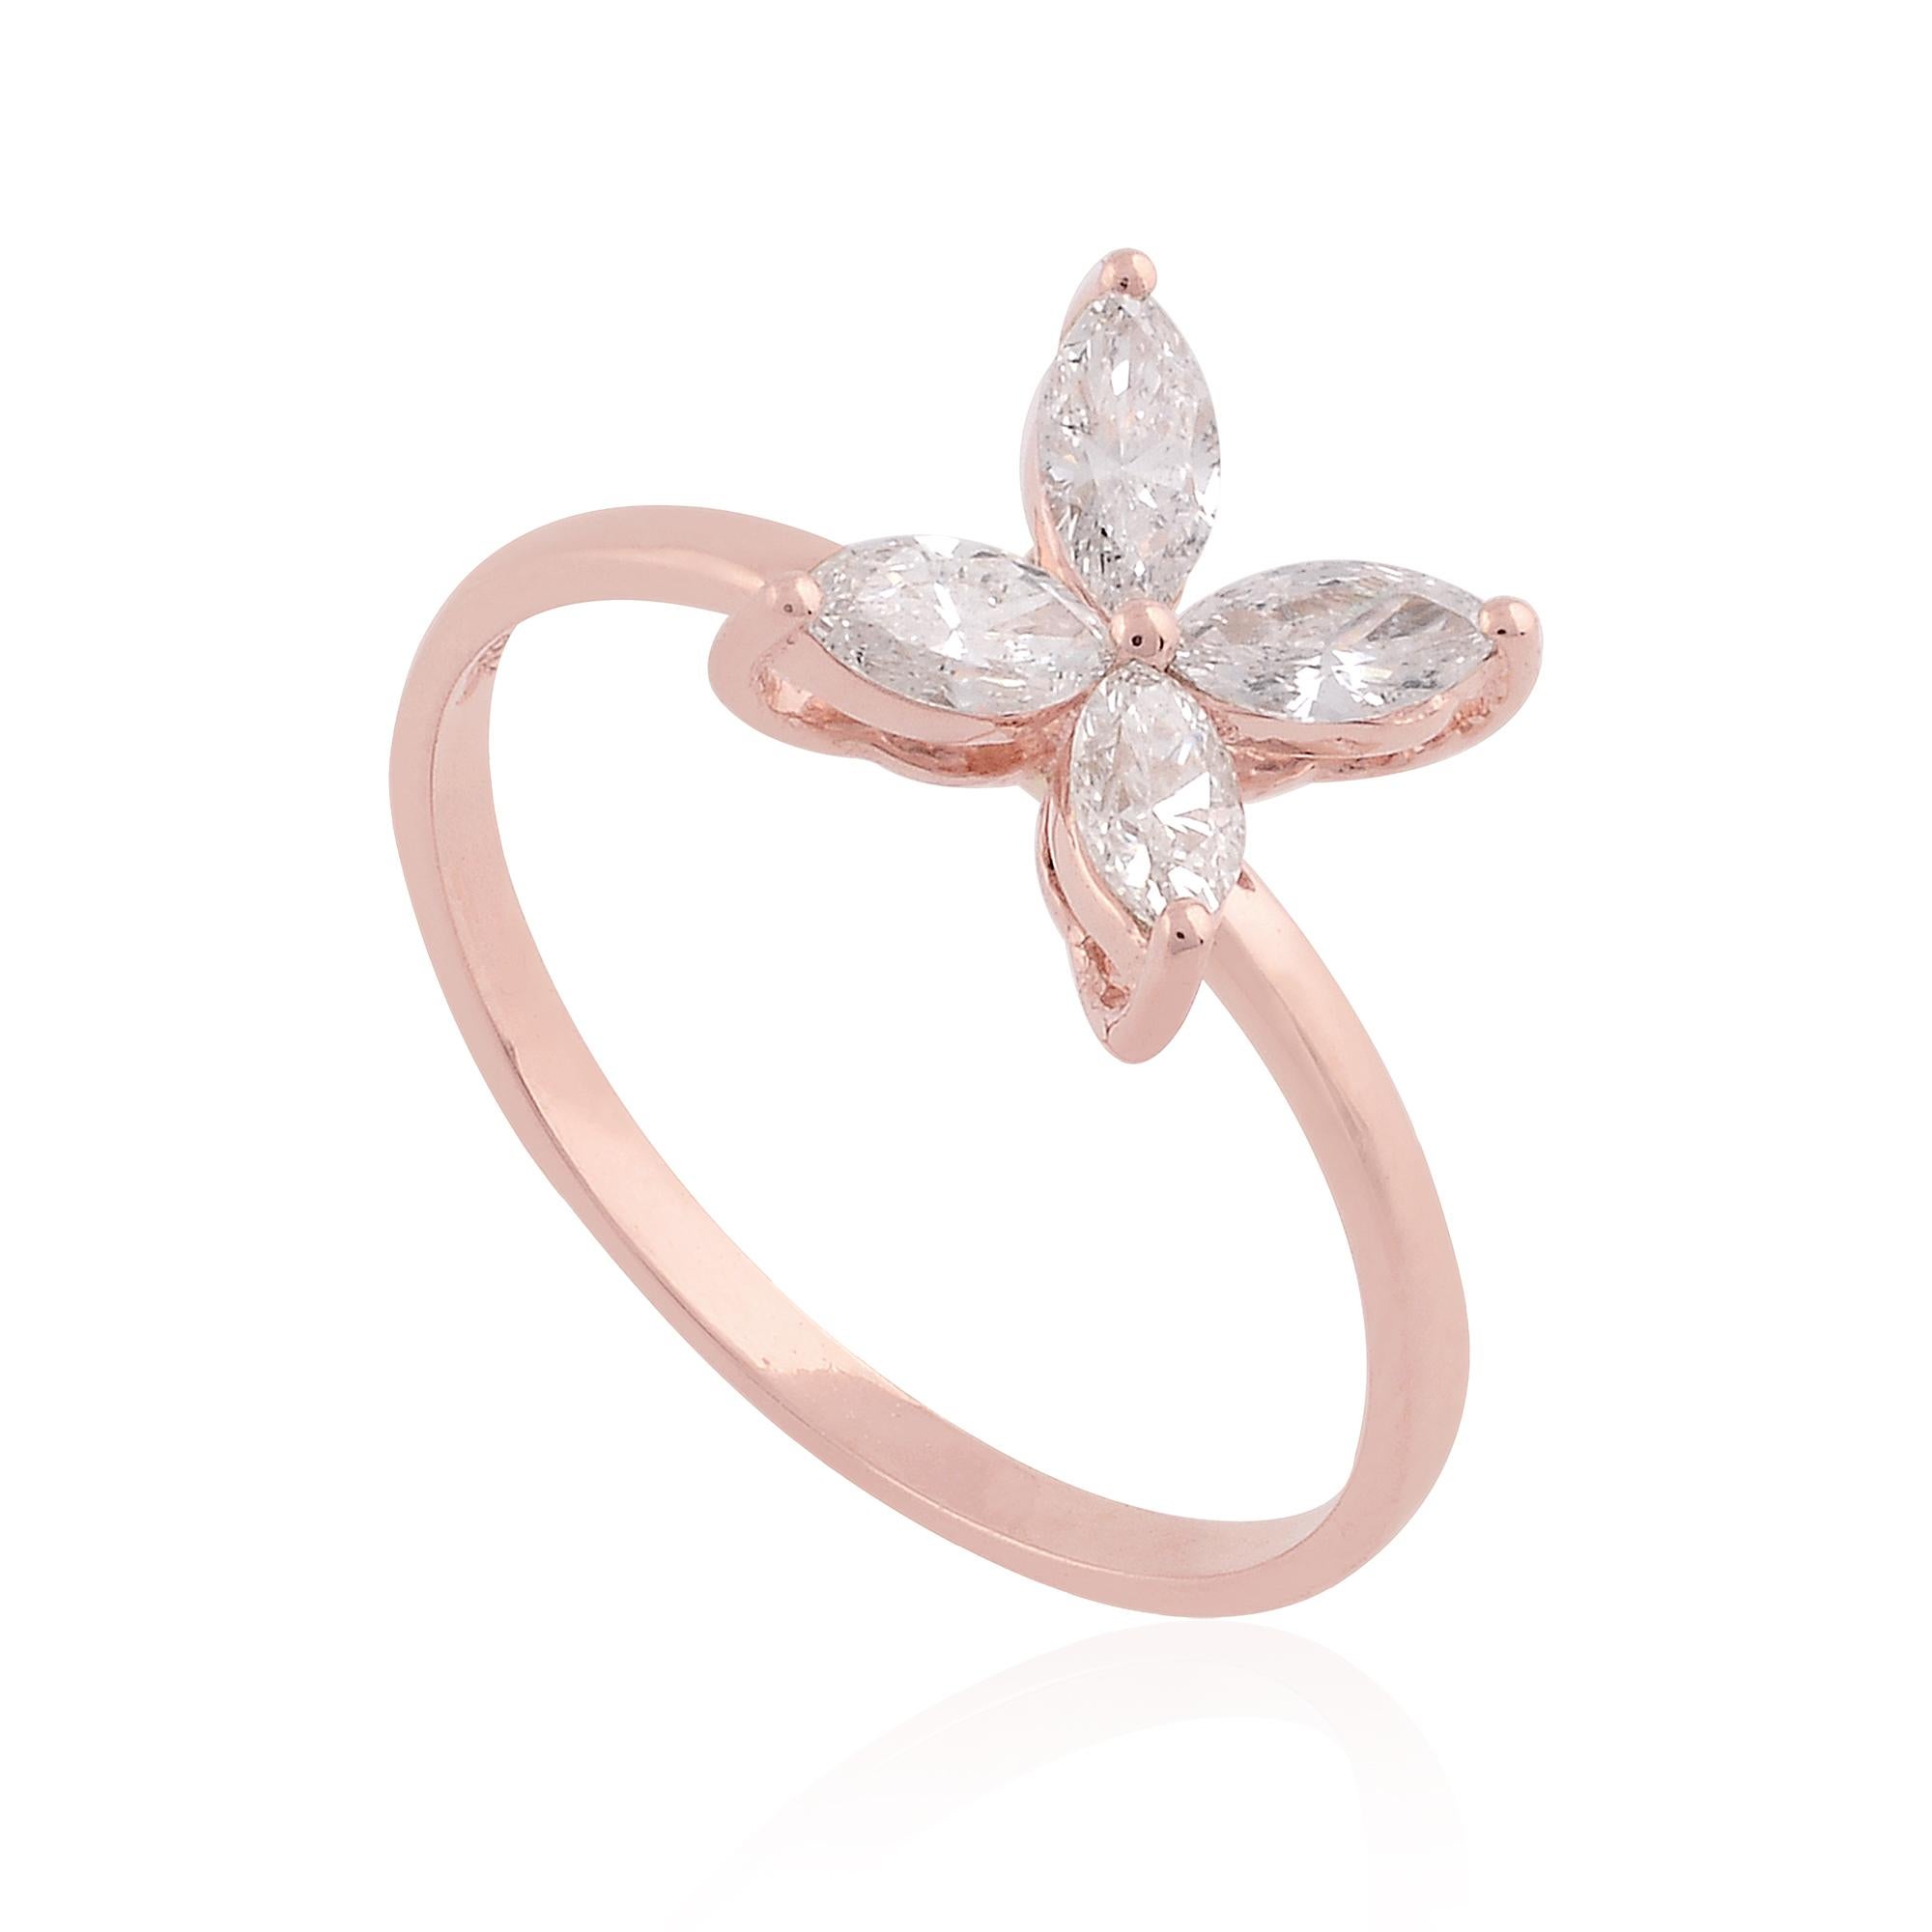 For Sale:  0.46 Carat SI Clarity HI Color Marquise Diamond Ring 18 Karat Rose Gold Jewelry 5